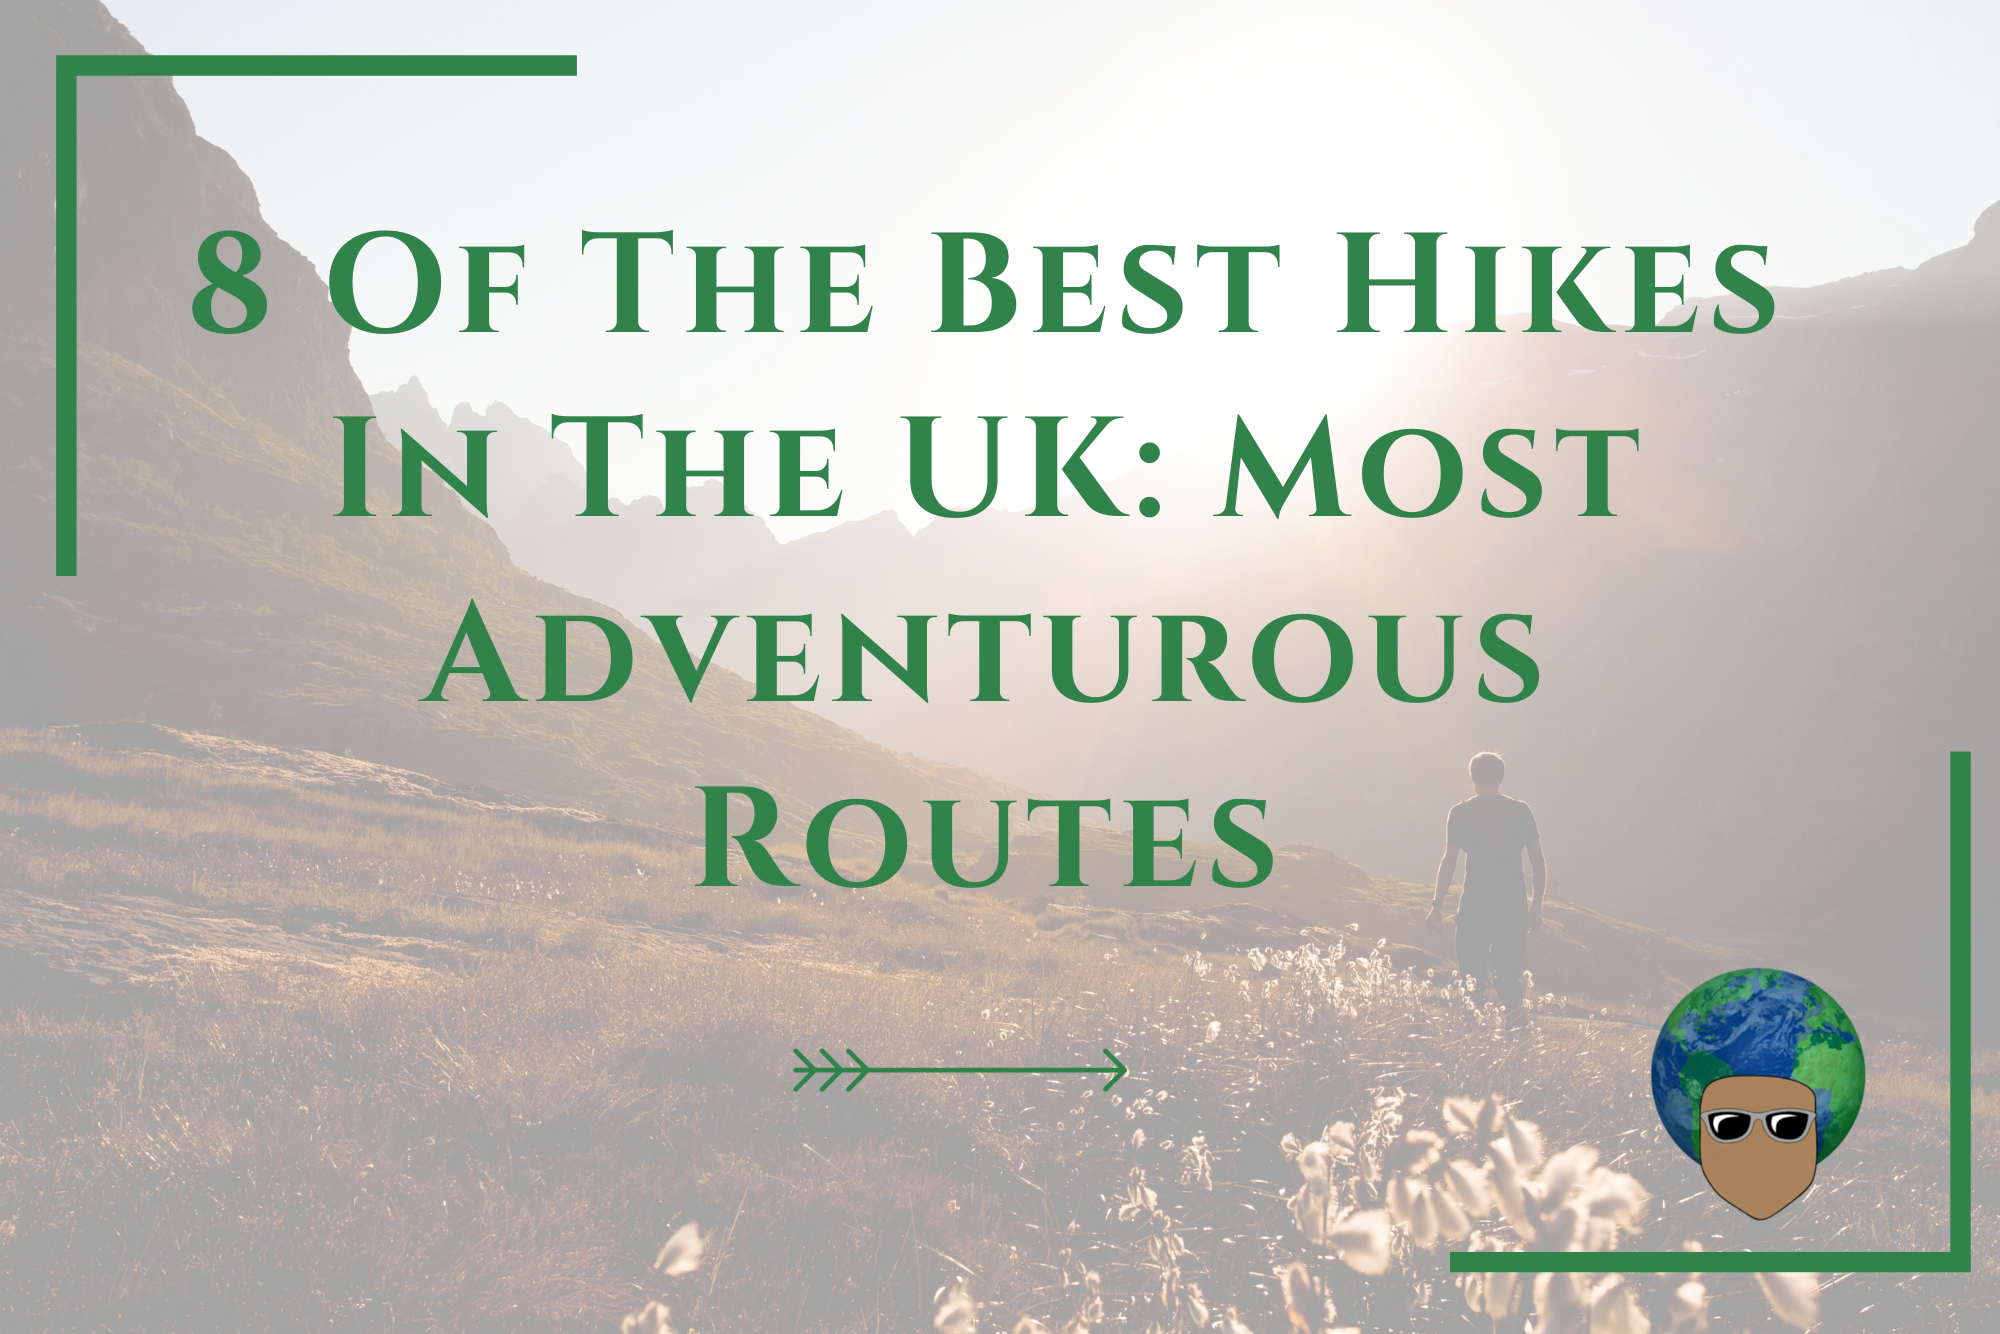 You are currently viewing 8 Of The Best Hikes In The UK: Most Adventurous Routes